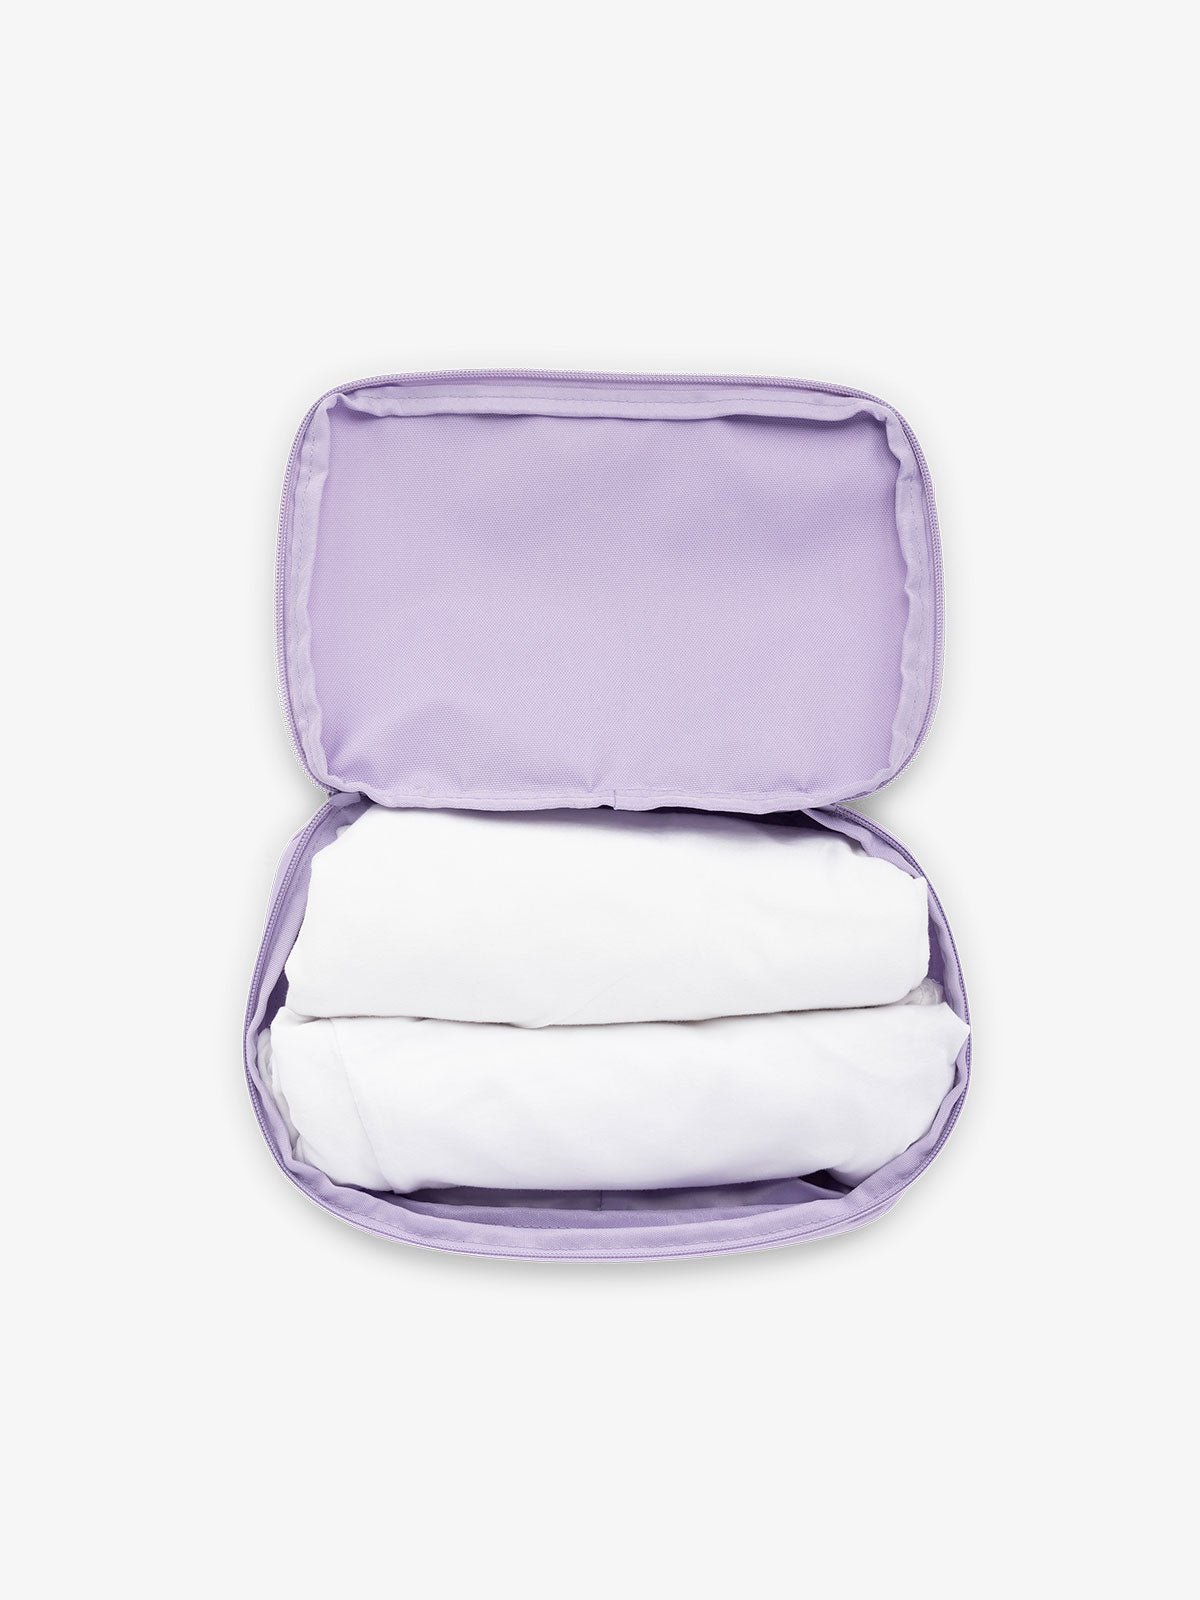 CALPAK small packing cubes for travel made with durable material in orchid